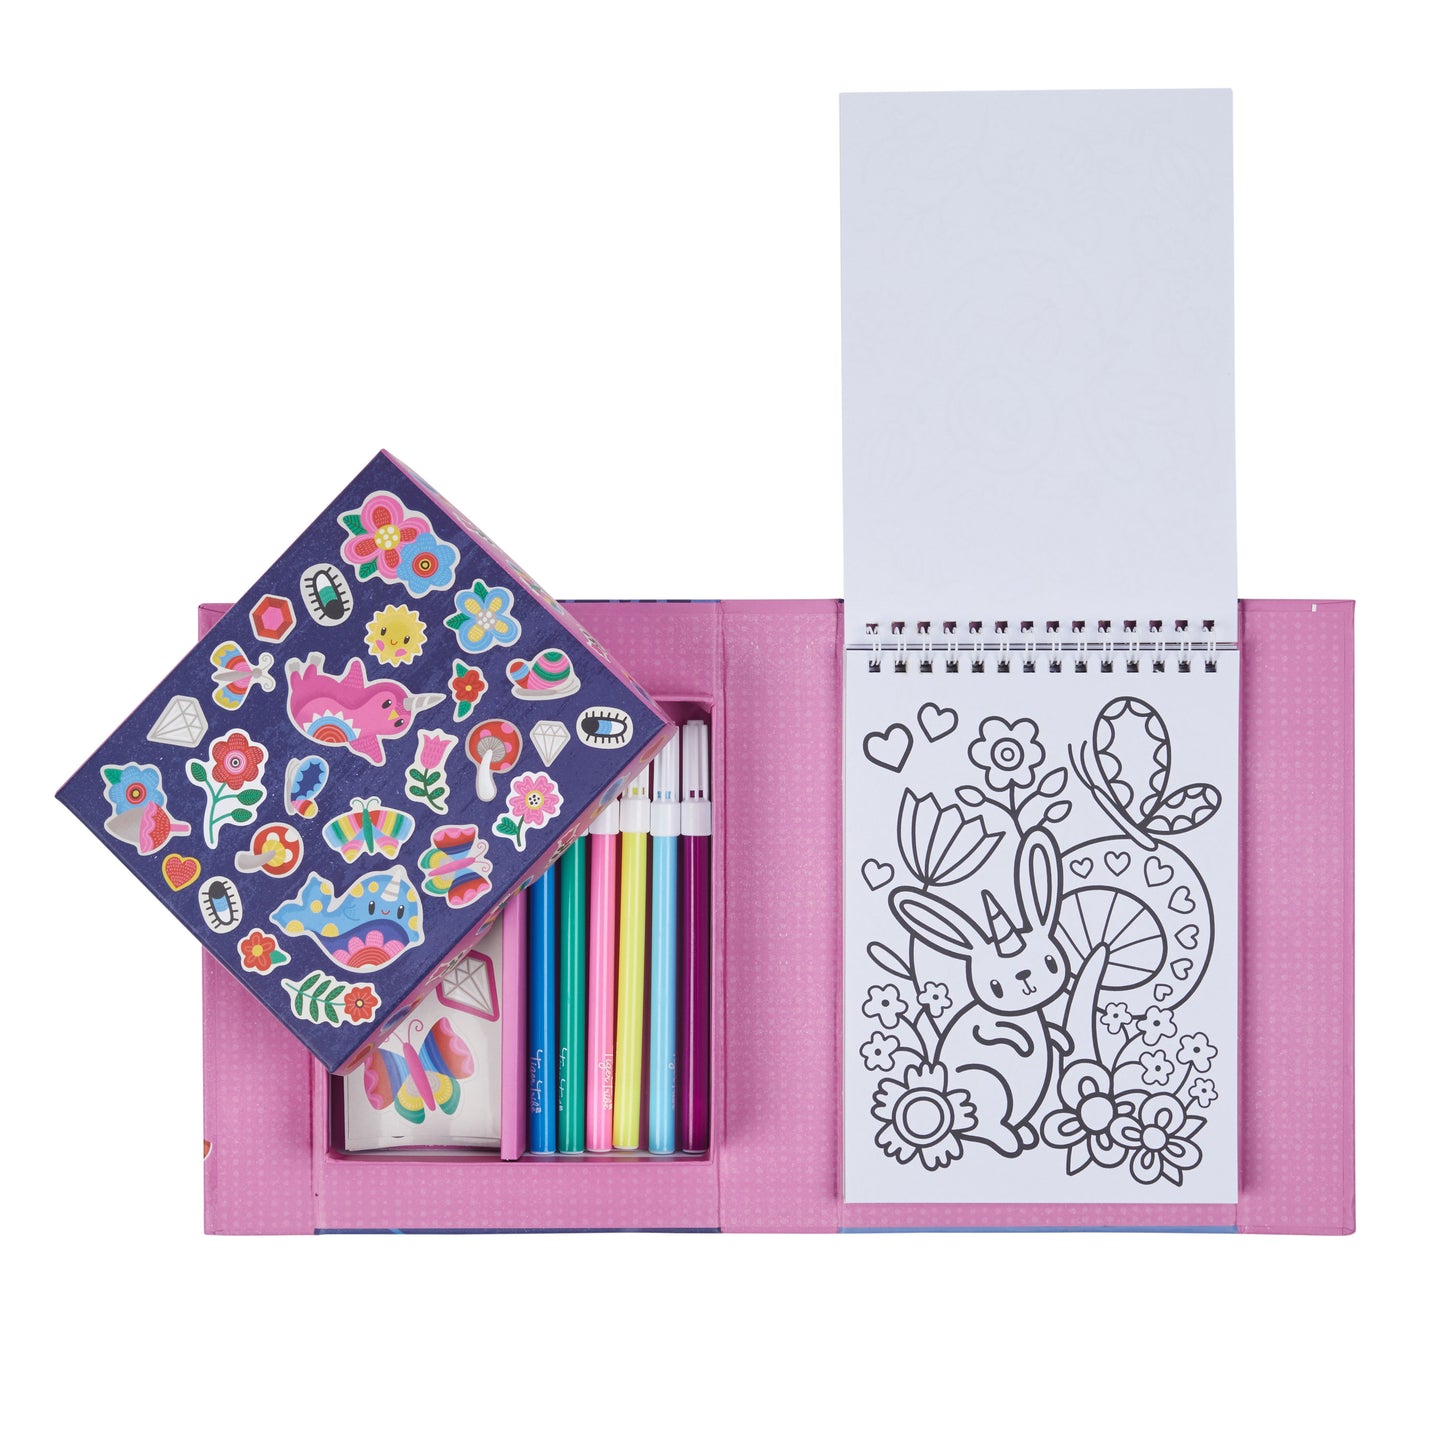 Colouring Set | Magical Creatures